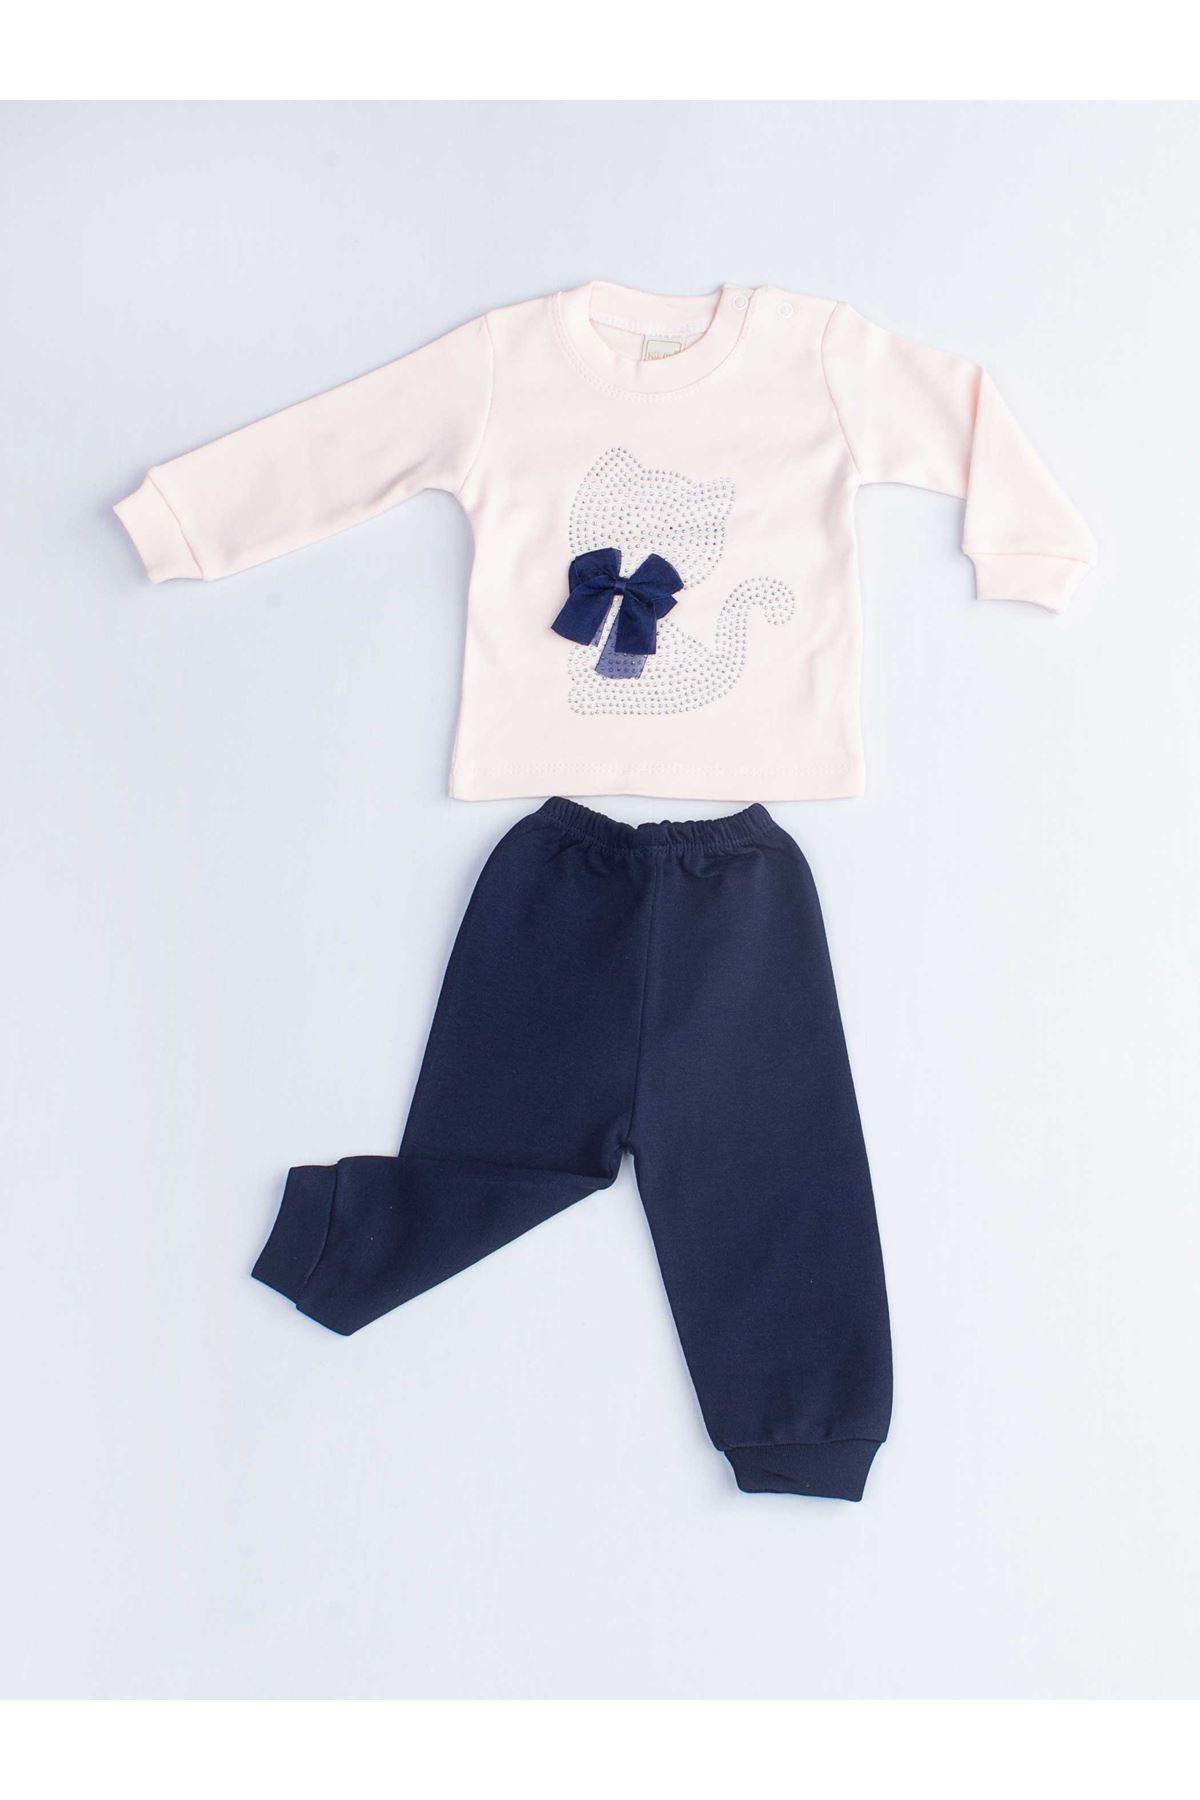 Powder Pink Navy Blue Baby Girl 2 Piece Set Tracksuit Bottom Babies Girls Wear Top Outfit Cotton Casual Casual Outfit models